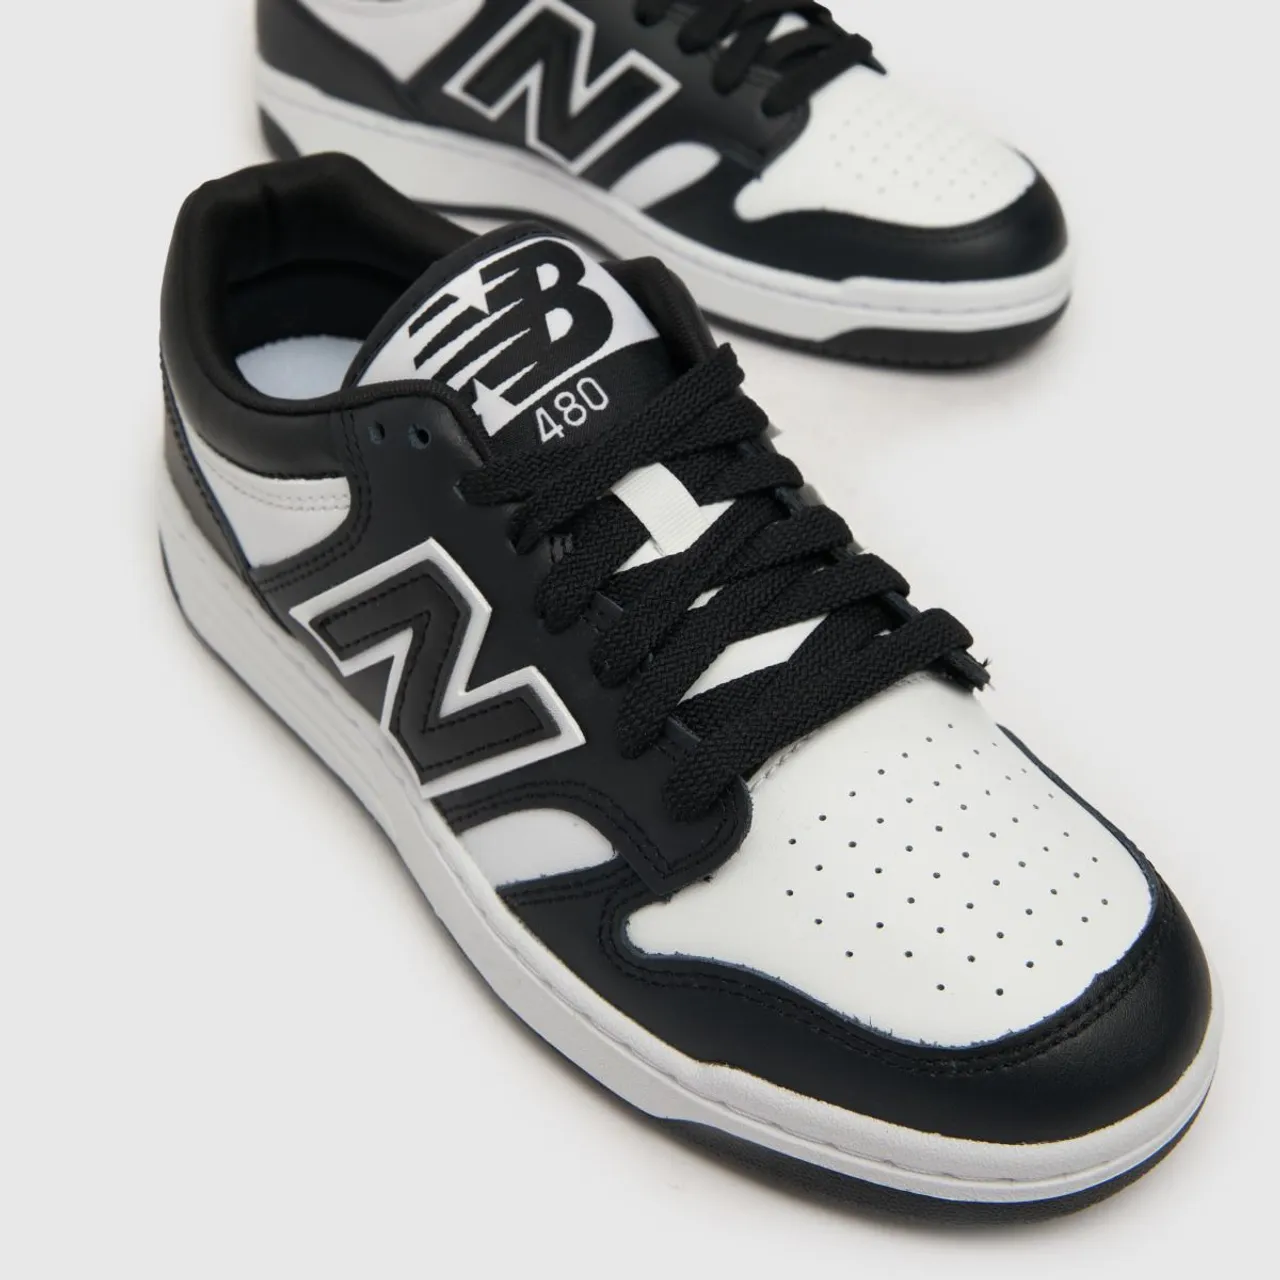 New Balance 480 Trainers In Black & White